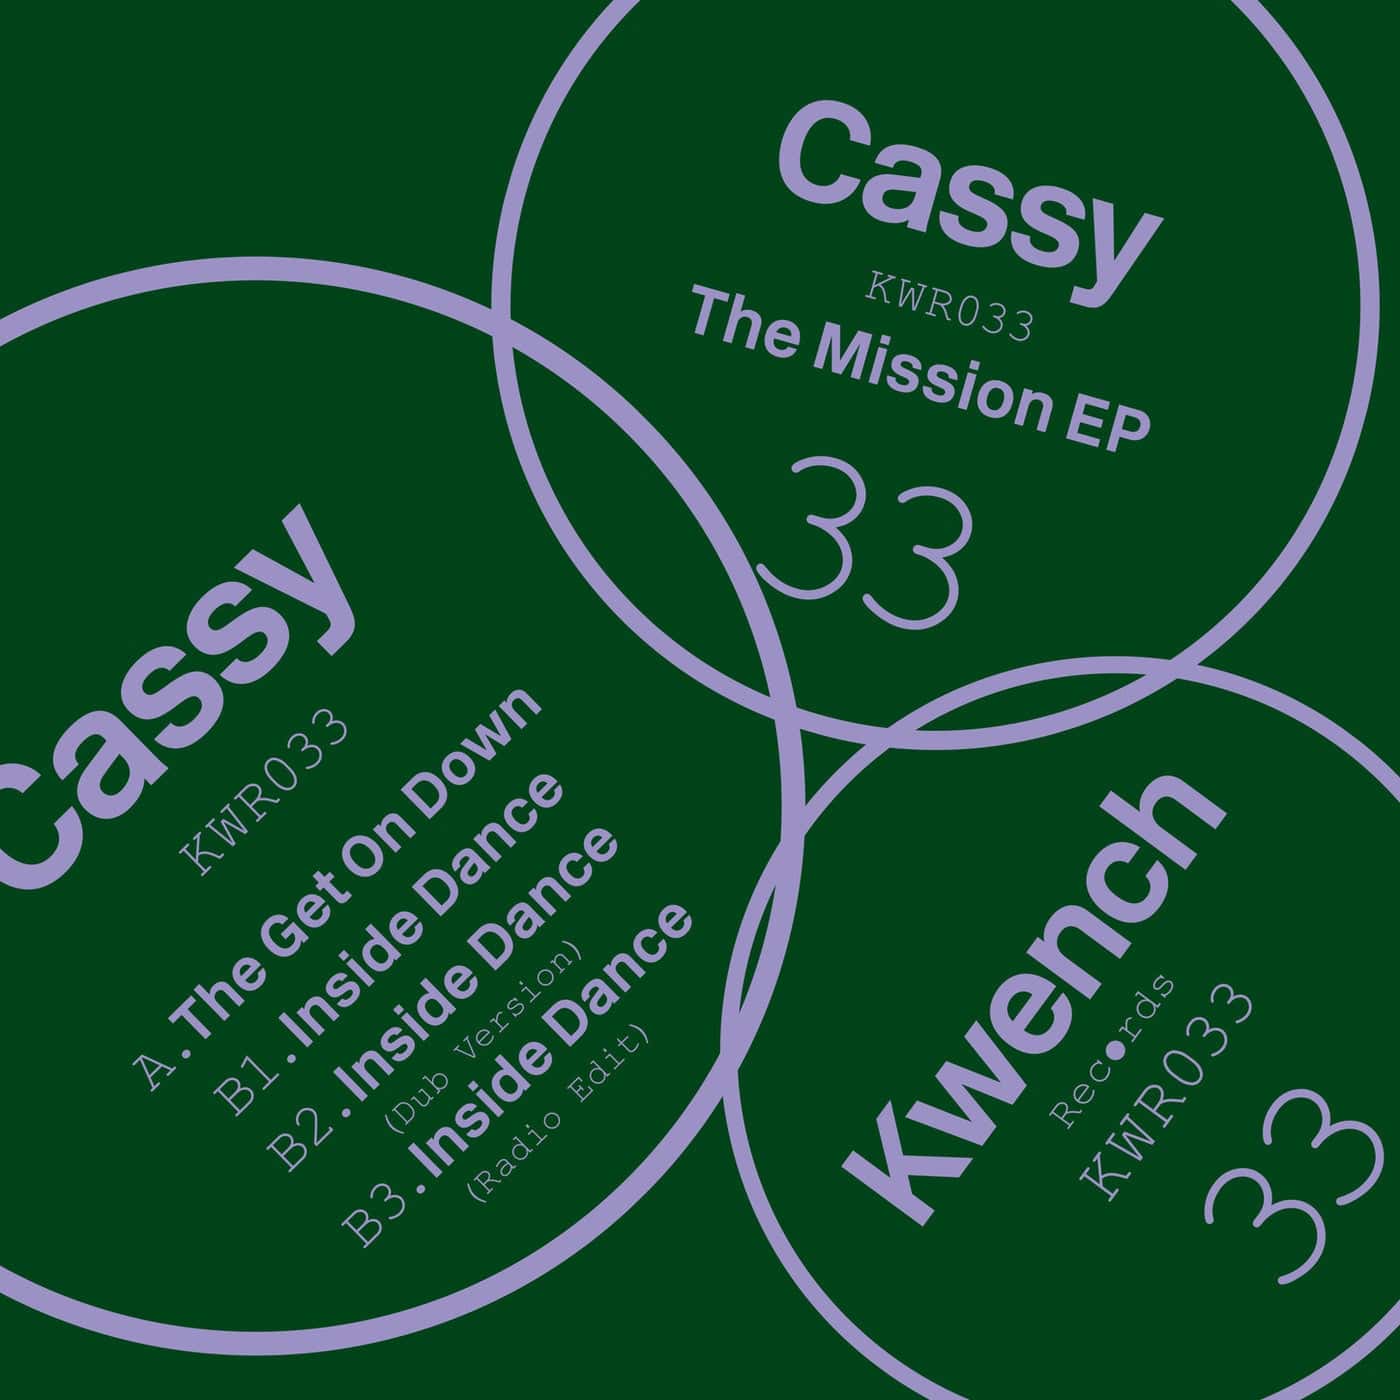 image cover: Cassy - The Mission EP / KWR033